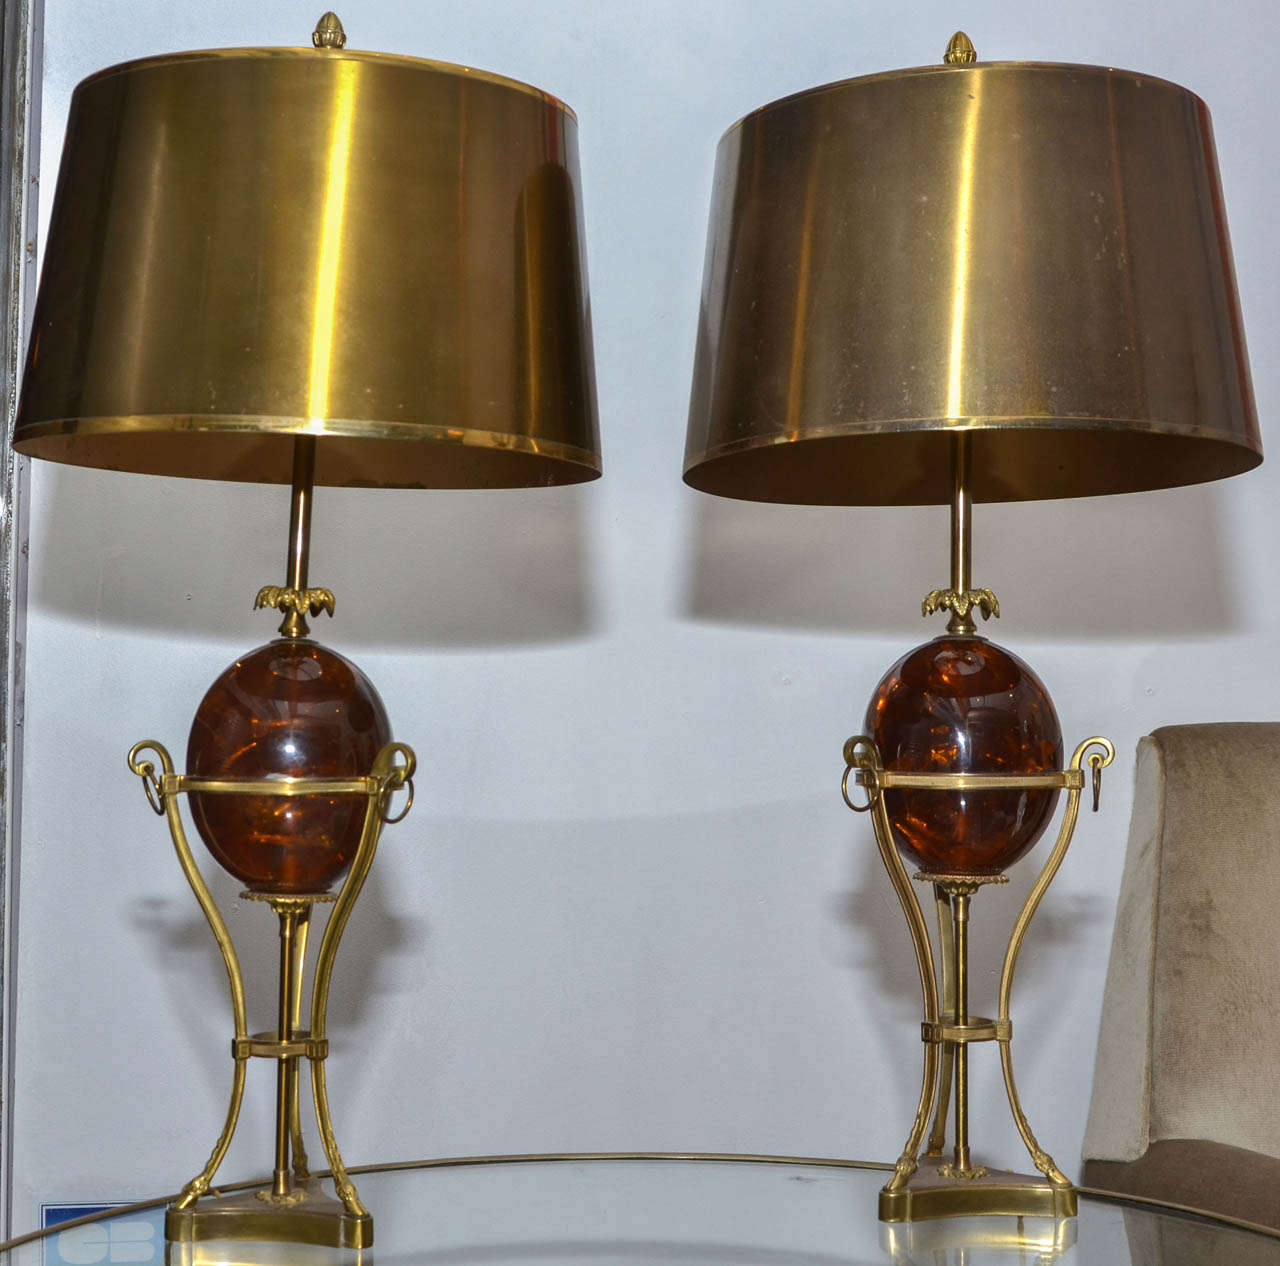 Pair of 1970's table lamps attributed to Maison Charles (no signature).  Brass structure and fractured resin spherical trunk. Original brass shade. Wired for european lighting. Shades sides are slightly twisted. Normal wear consistent with age and